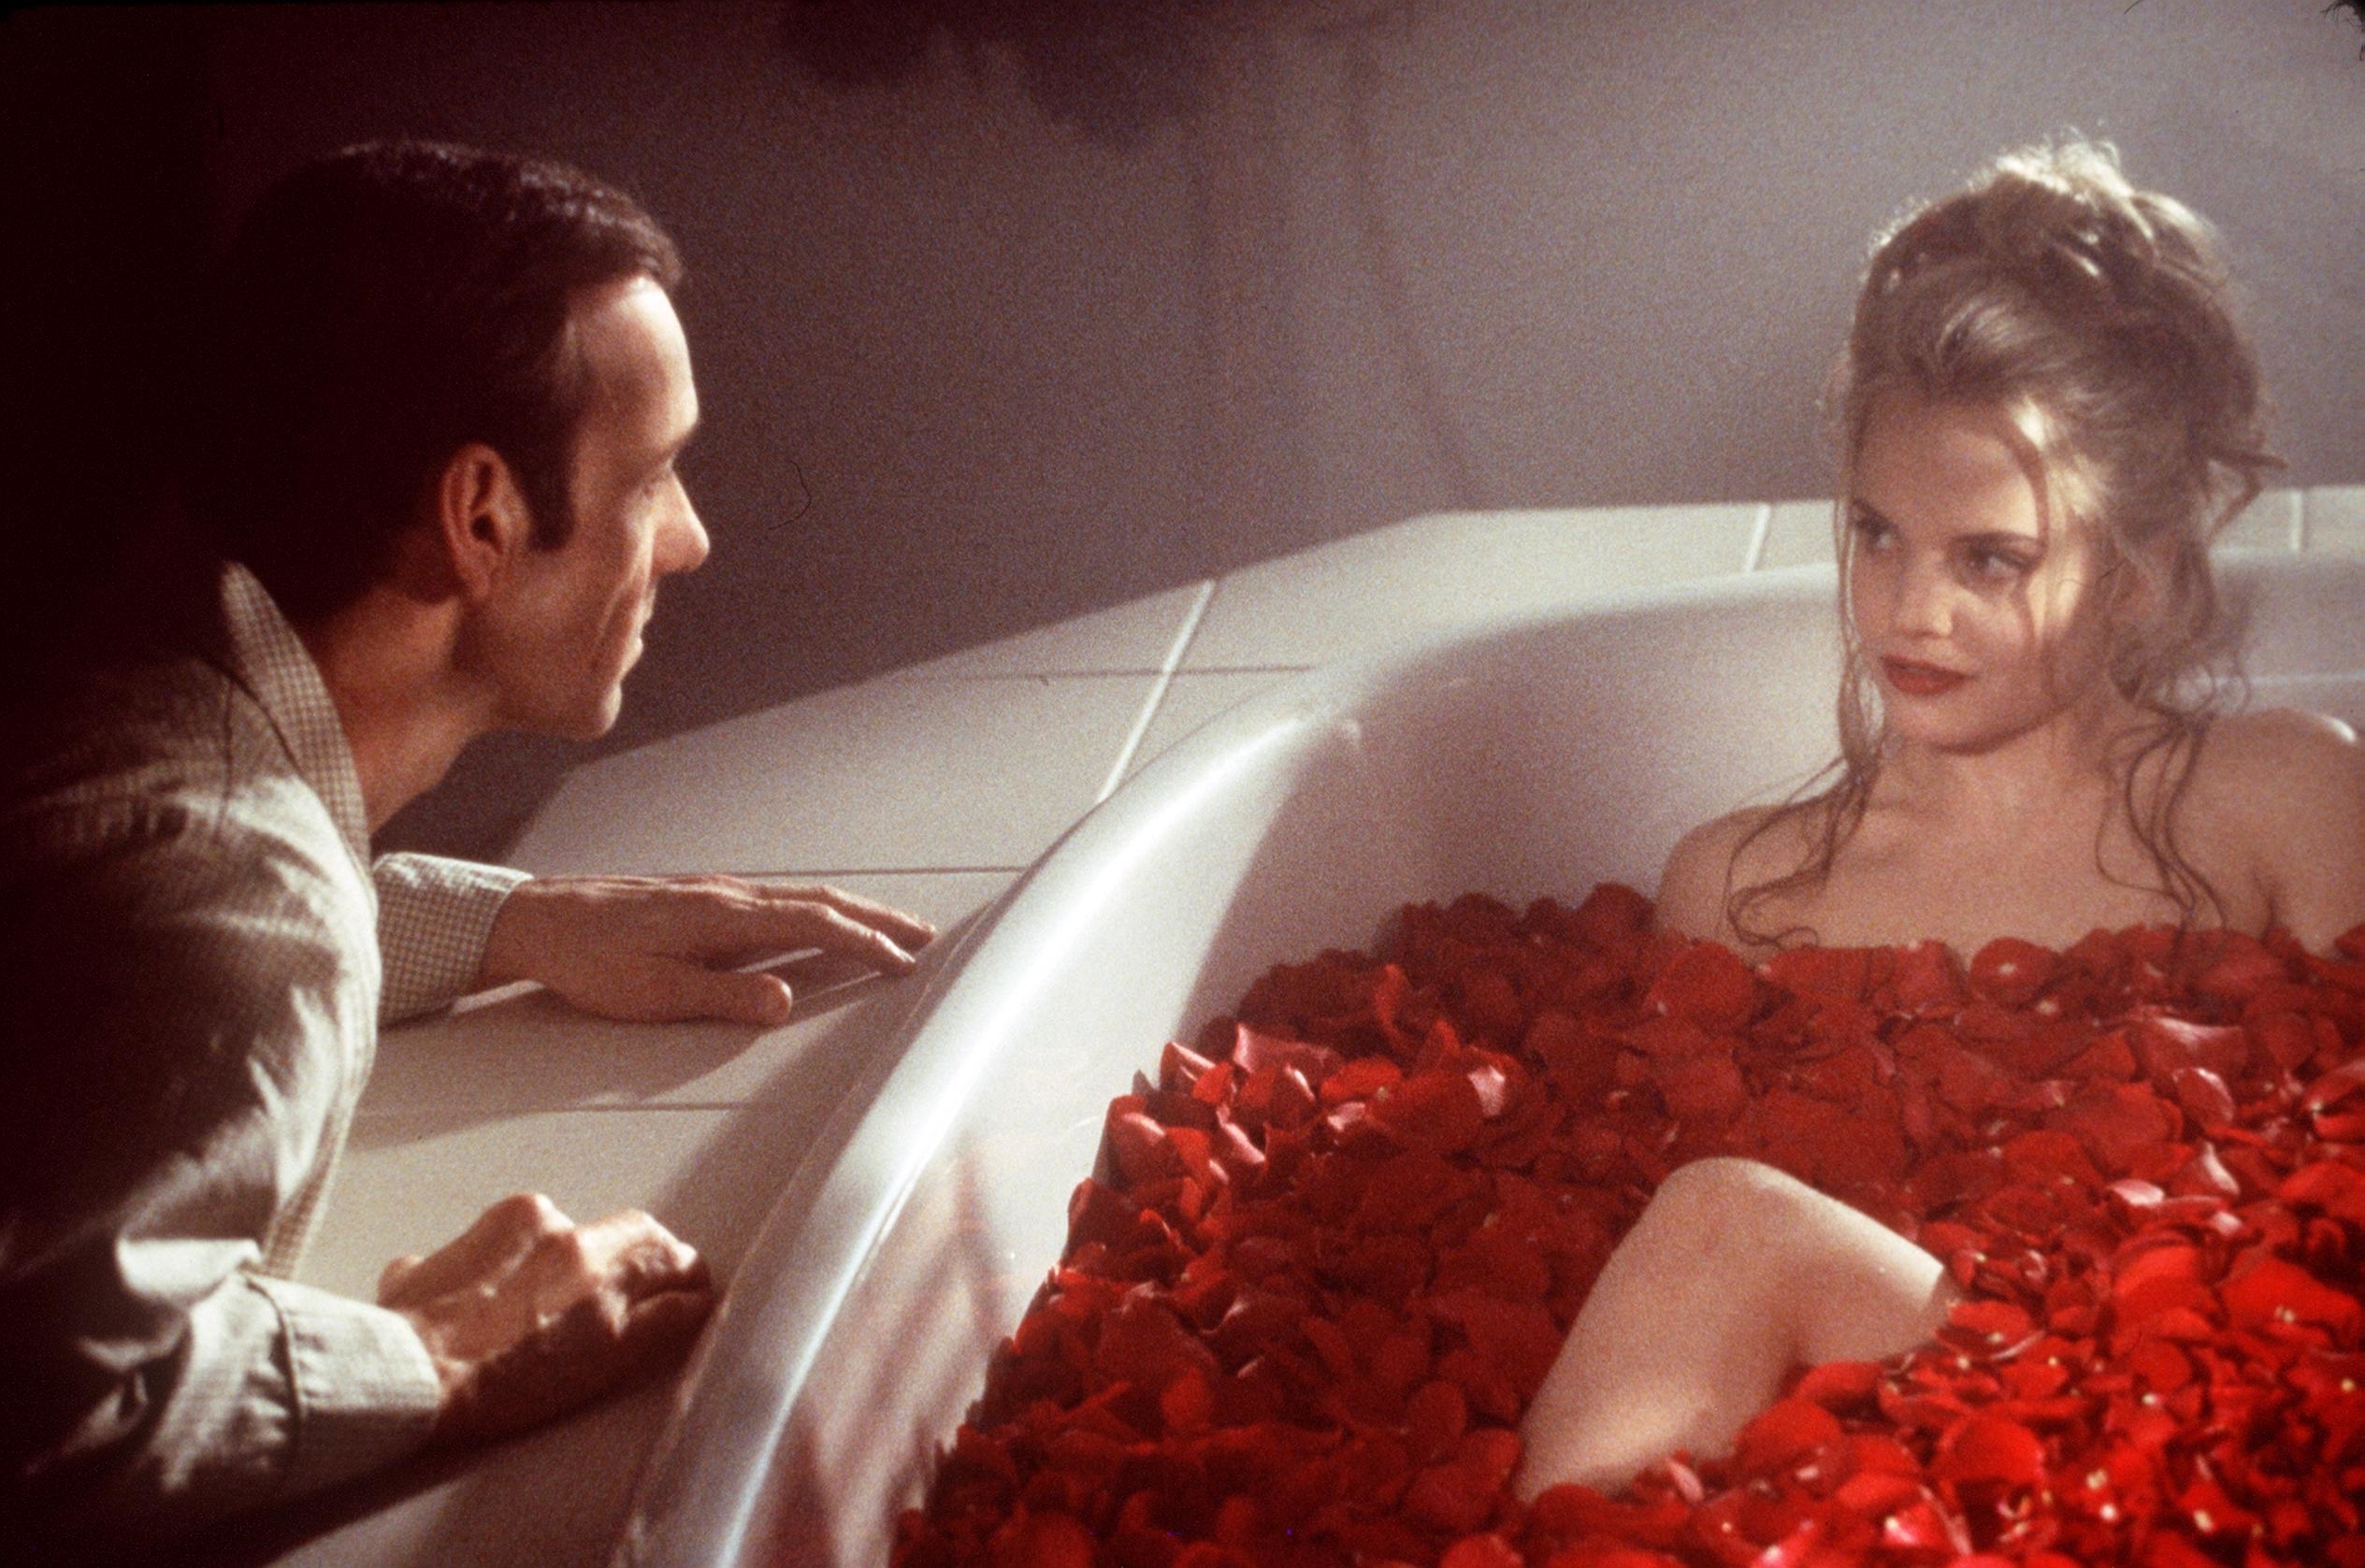 Kevin Spacey looking at Mena Suvari, who is in a bathtub filled with rose petals, in a scene from &quot;American Beauty&quot;